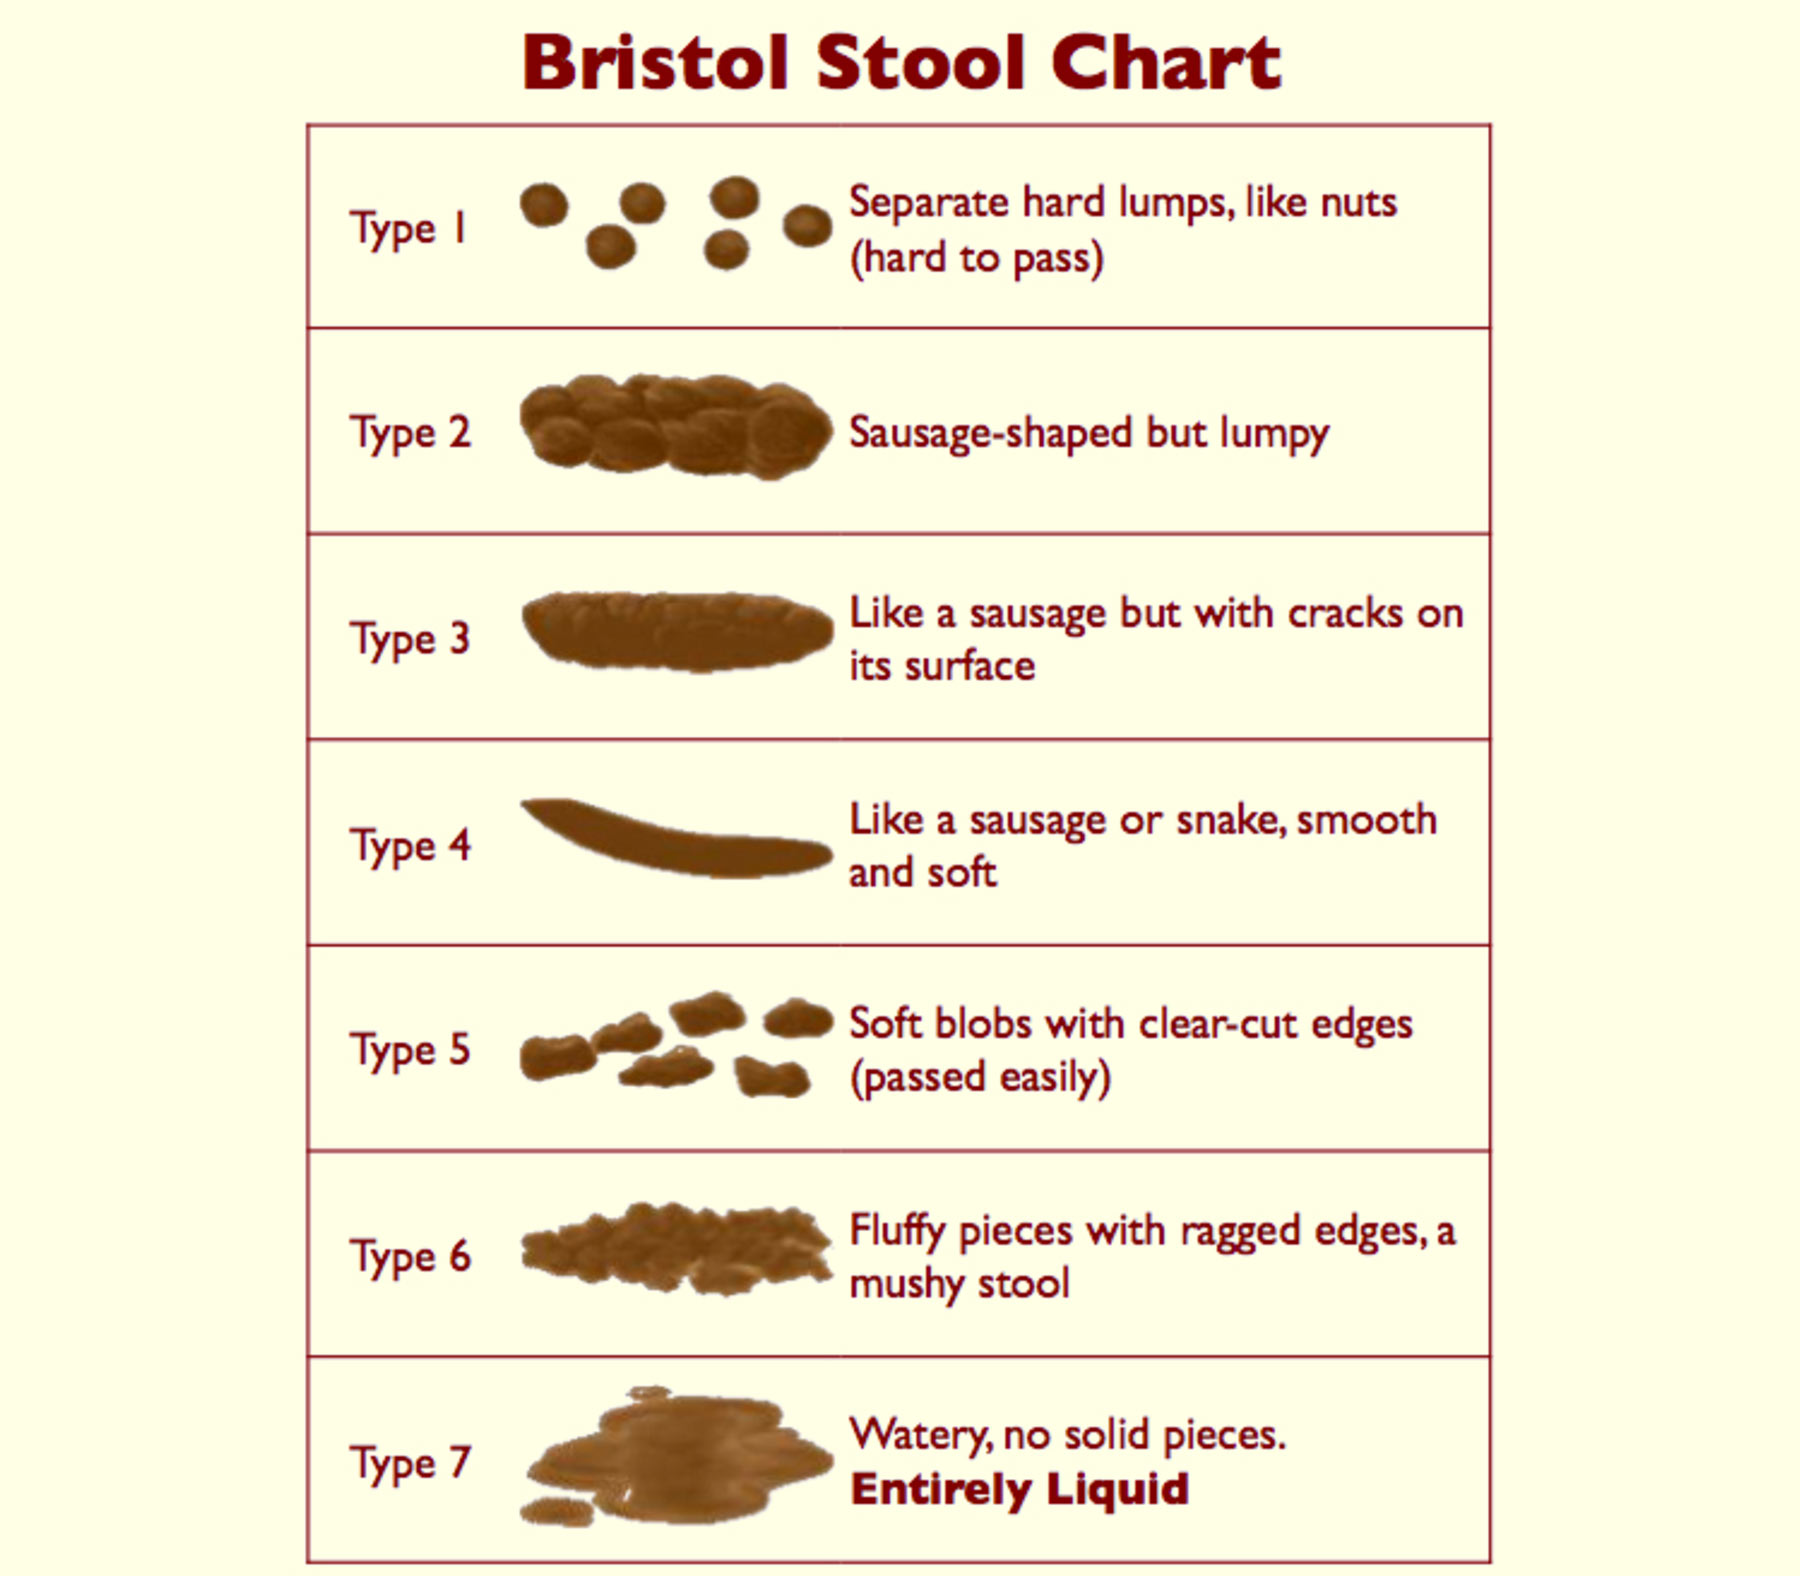 The Bristol Stool Chart indicates healthy bowel motions as opposed to unhealthy stools